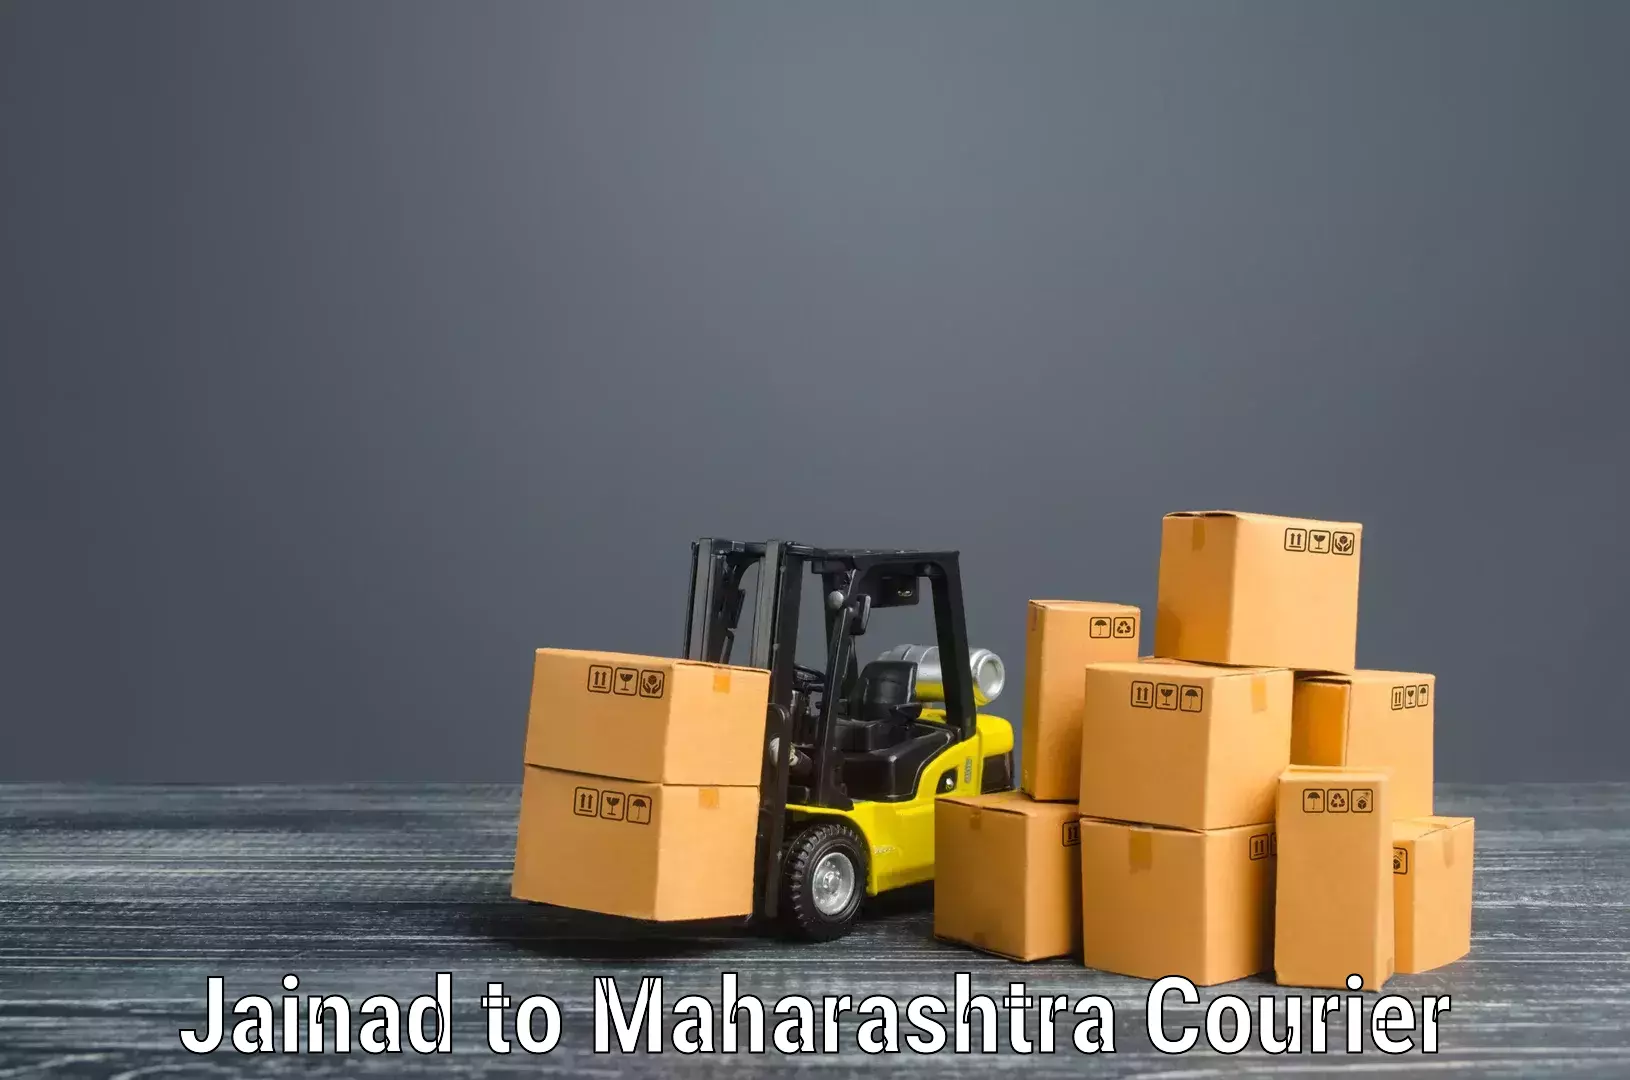 Household transport solutions Jainad to Andheri